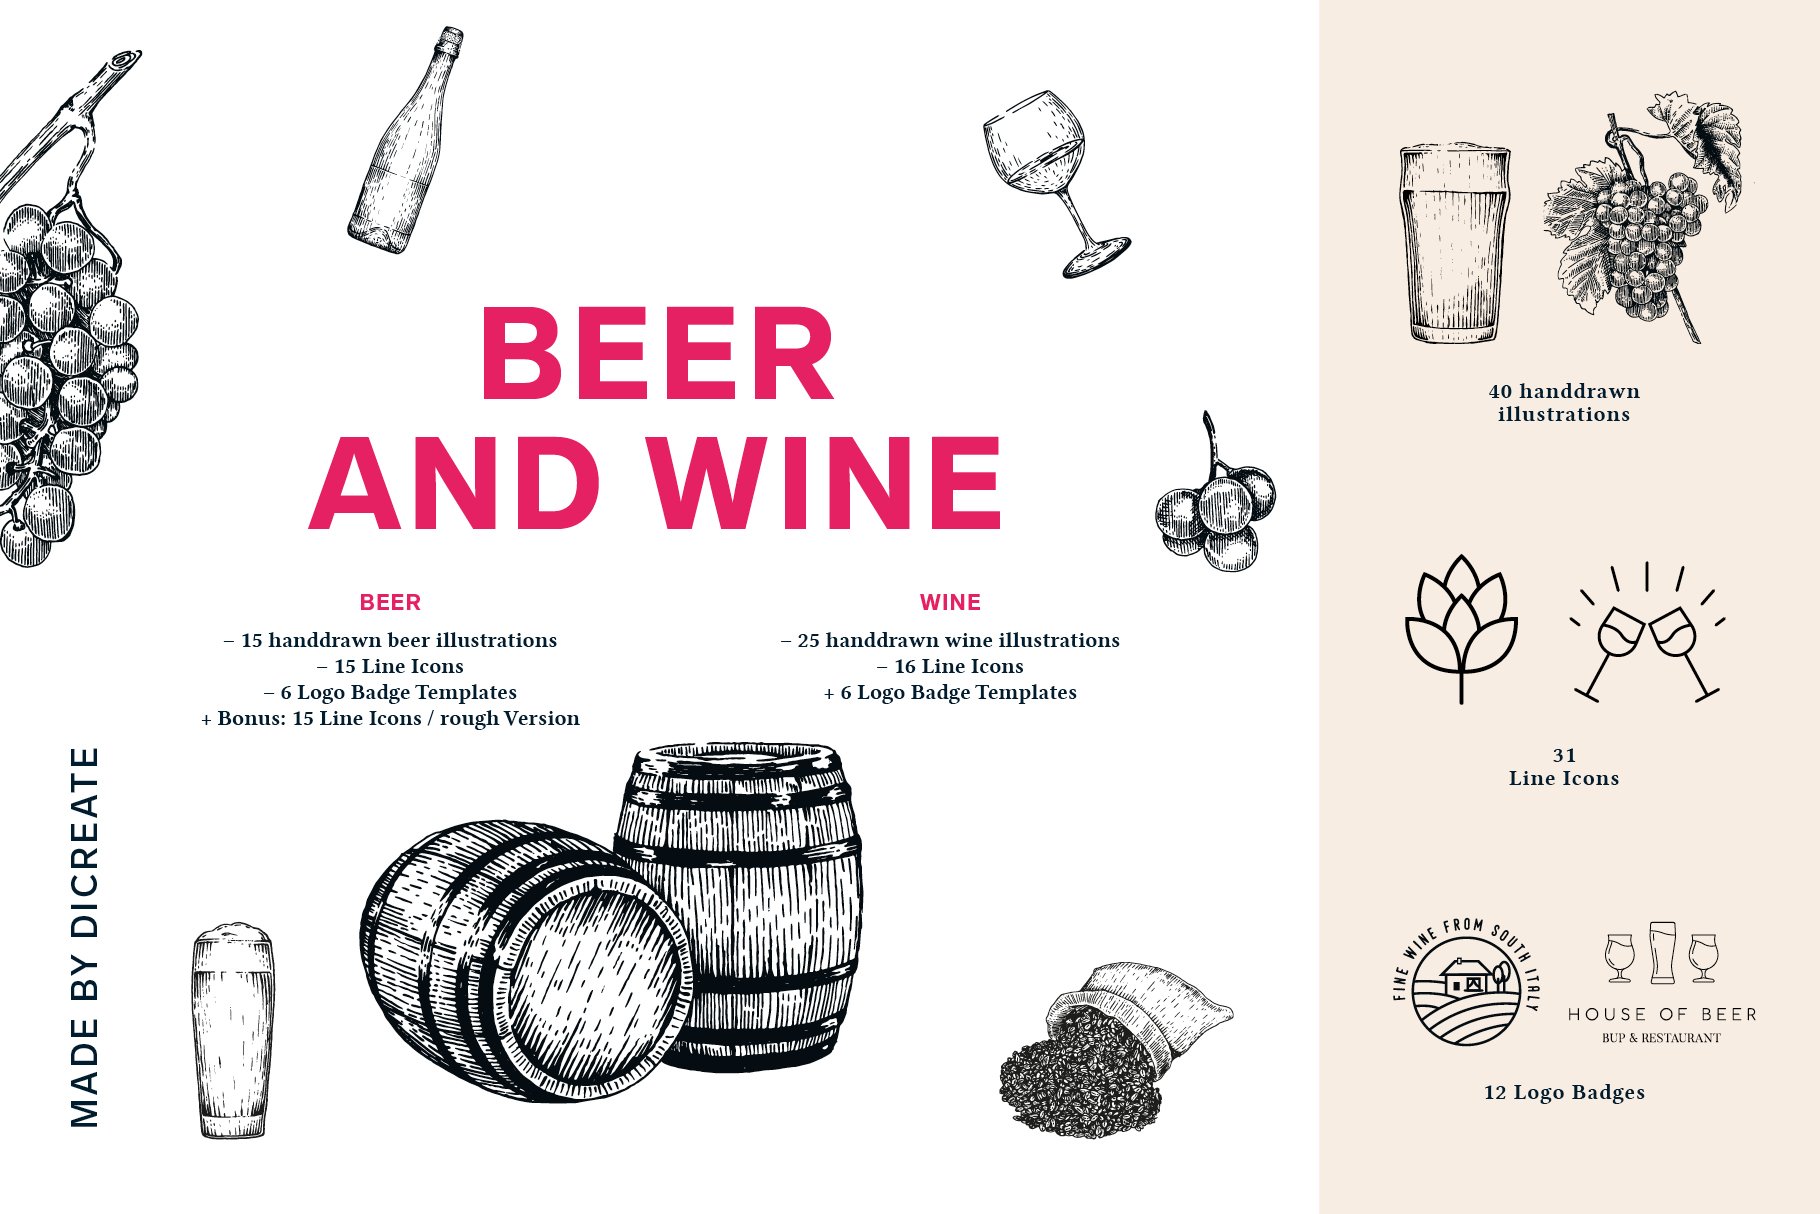 Beer and Wine Bundle cover image.